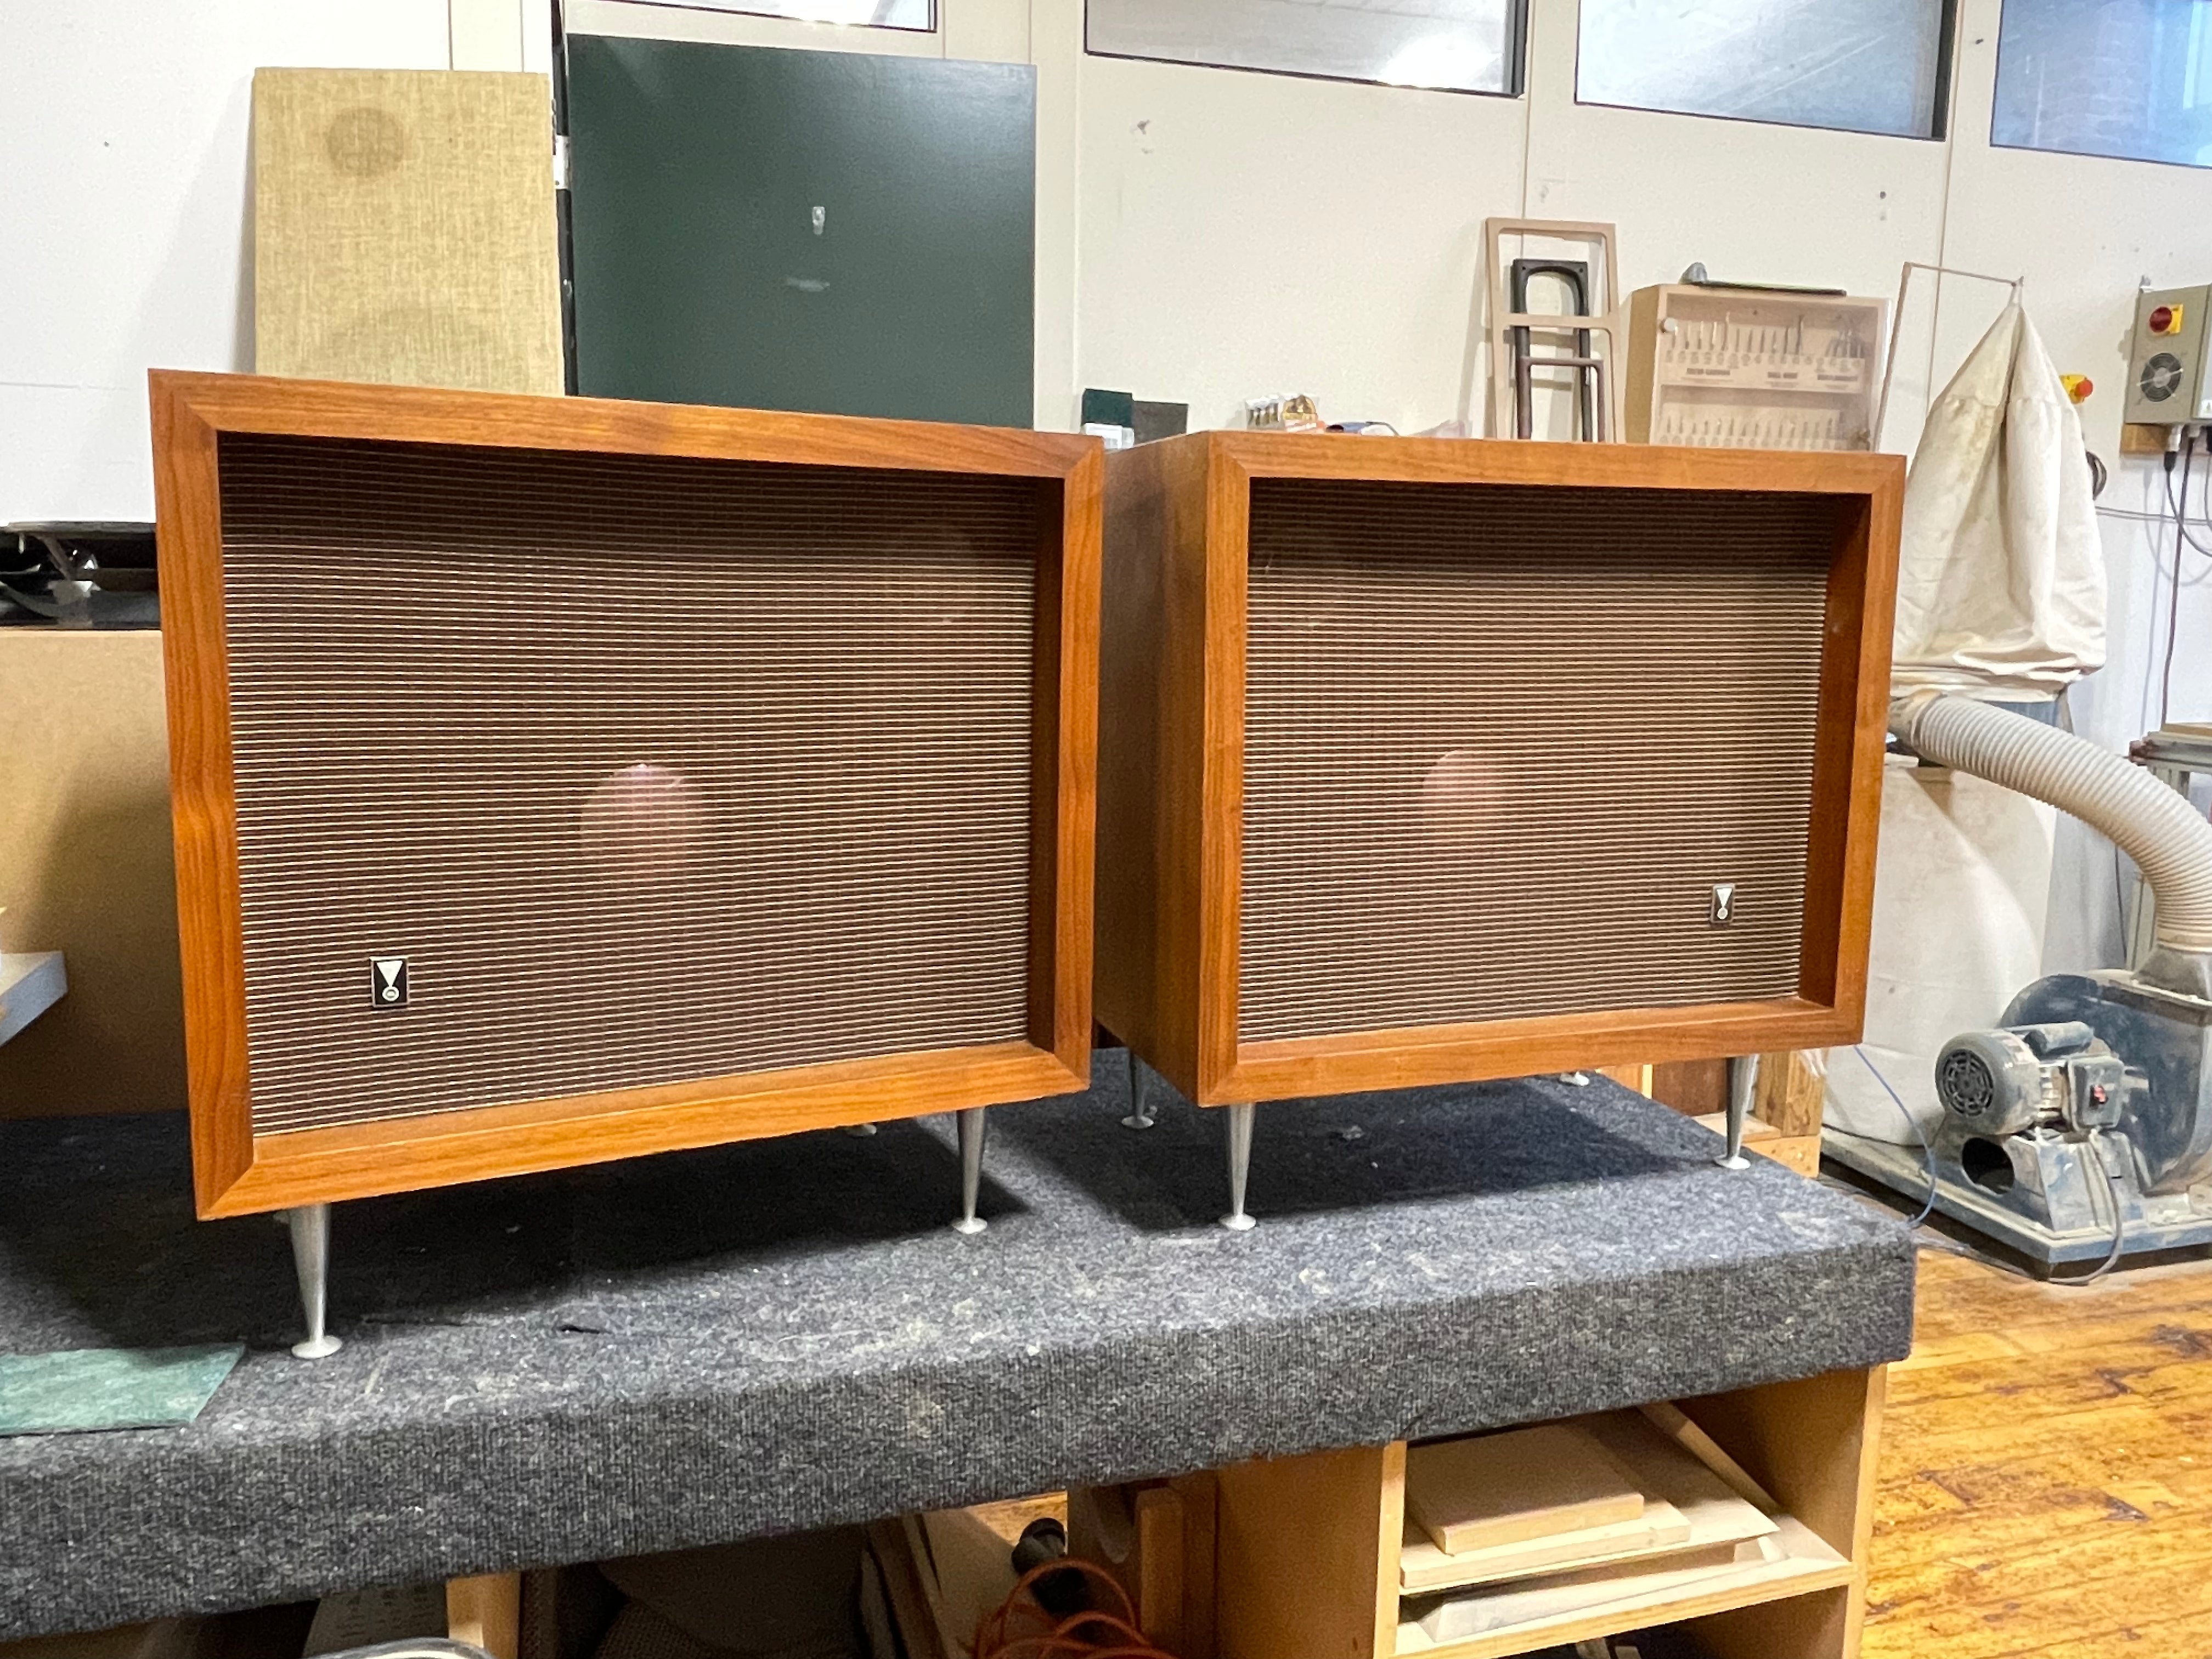 JBL '030' C38 "The Baron" Speaker System - Amazing JBL MCM Cabinets... So Right Now!!